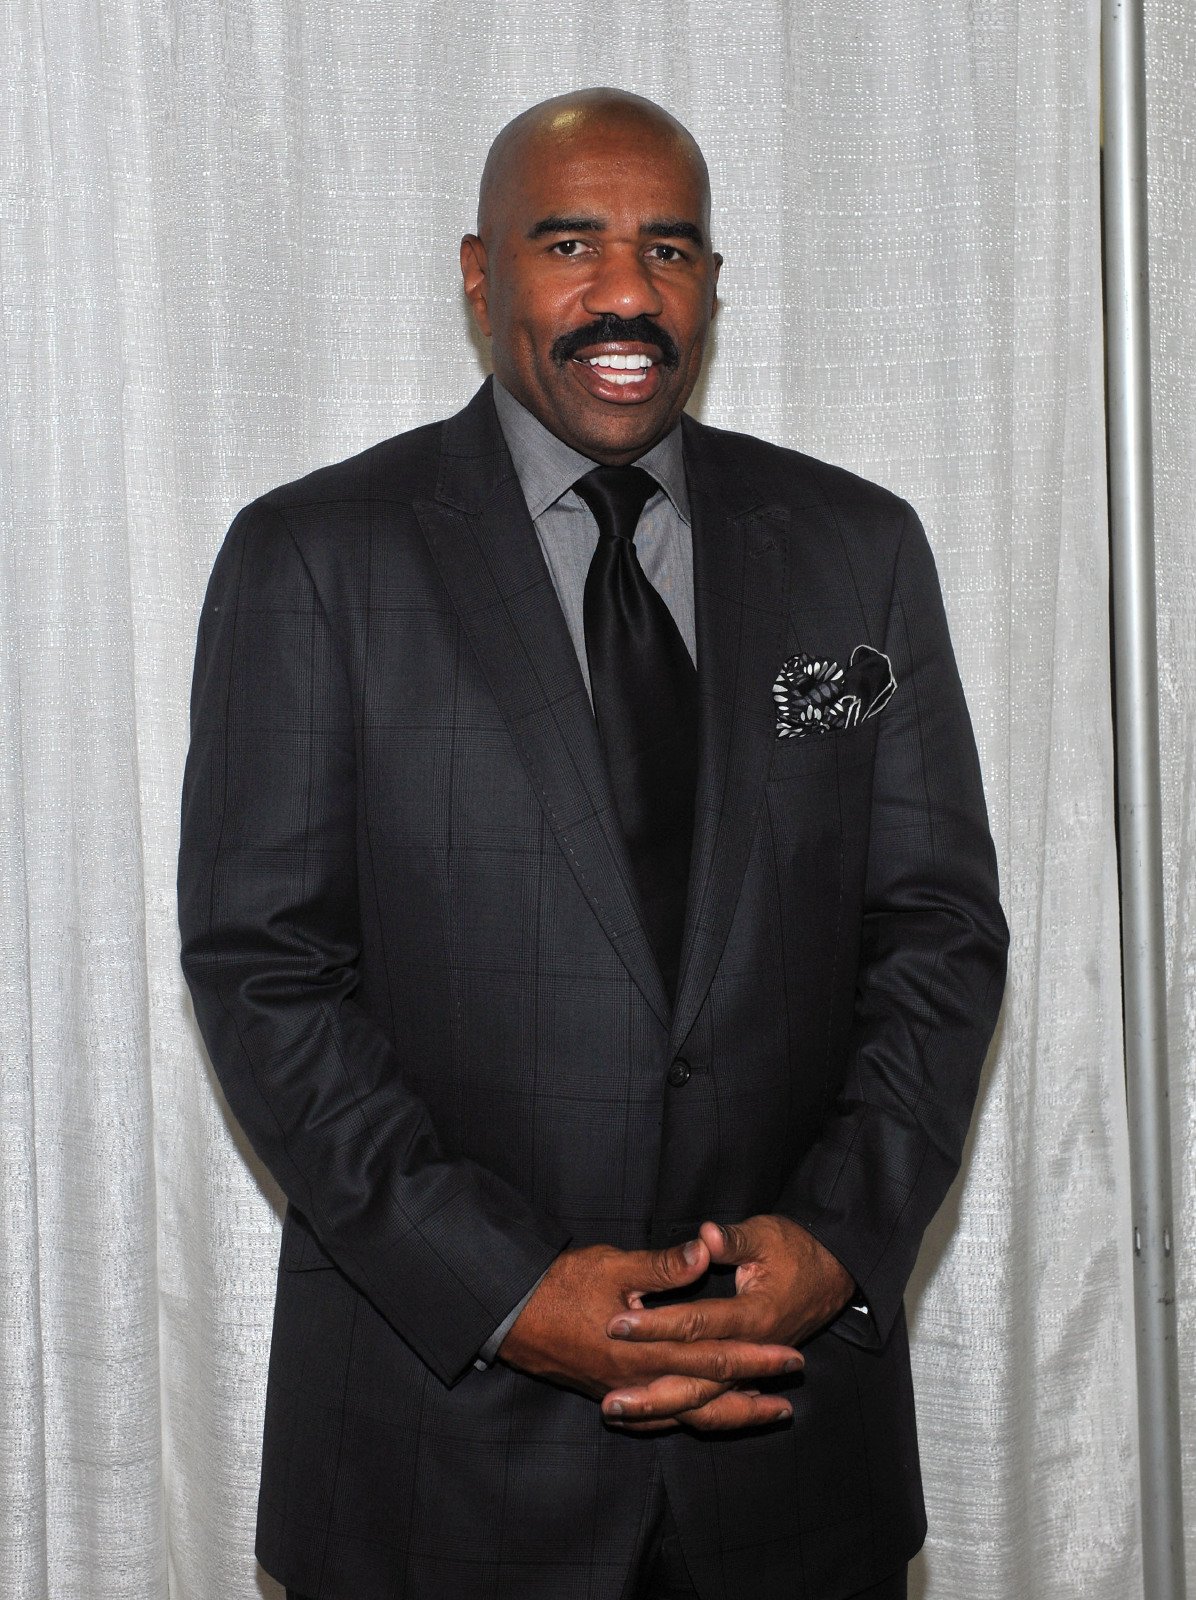 Actor/comedian Steve Harvey attends the 2011 Steve Harvey Mentoring Weekend at the Jacob Javits Center on October 7, 2011 | Photo: Getty Images